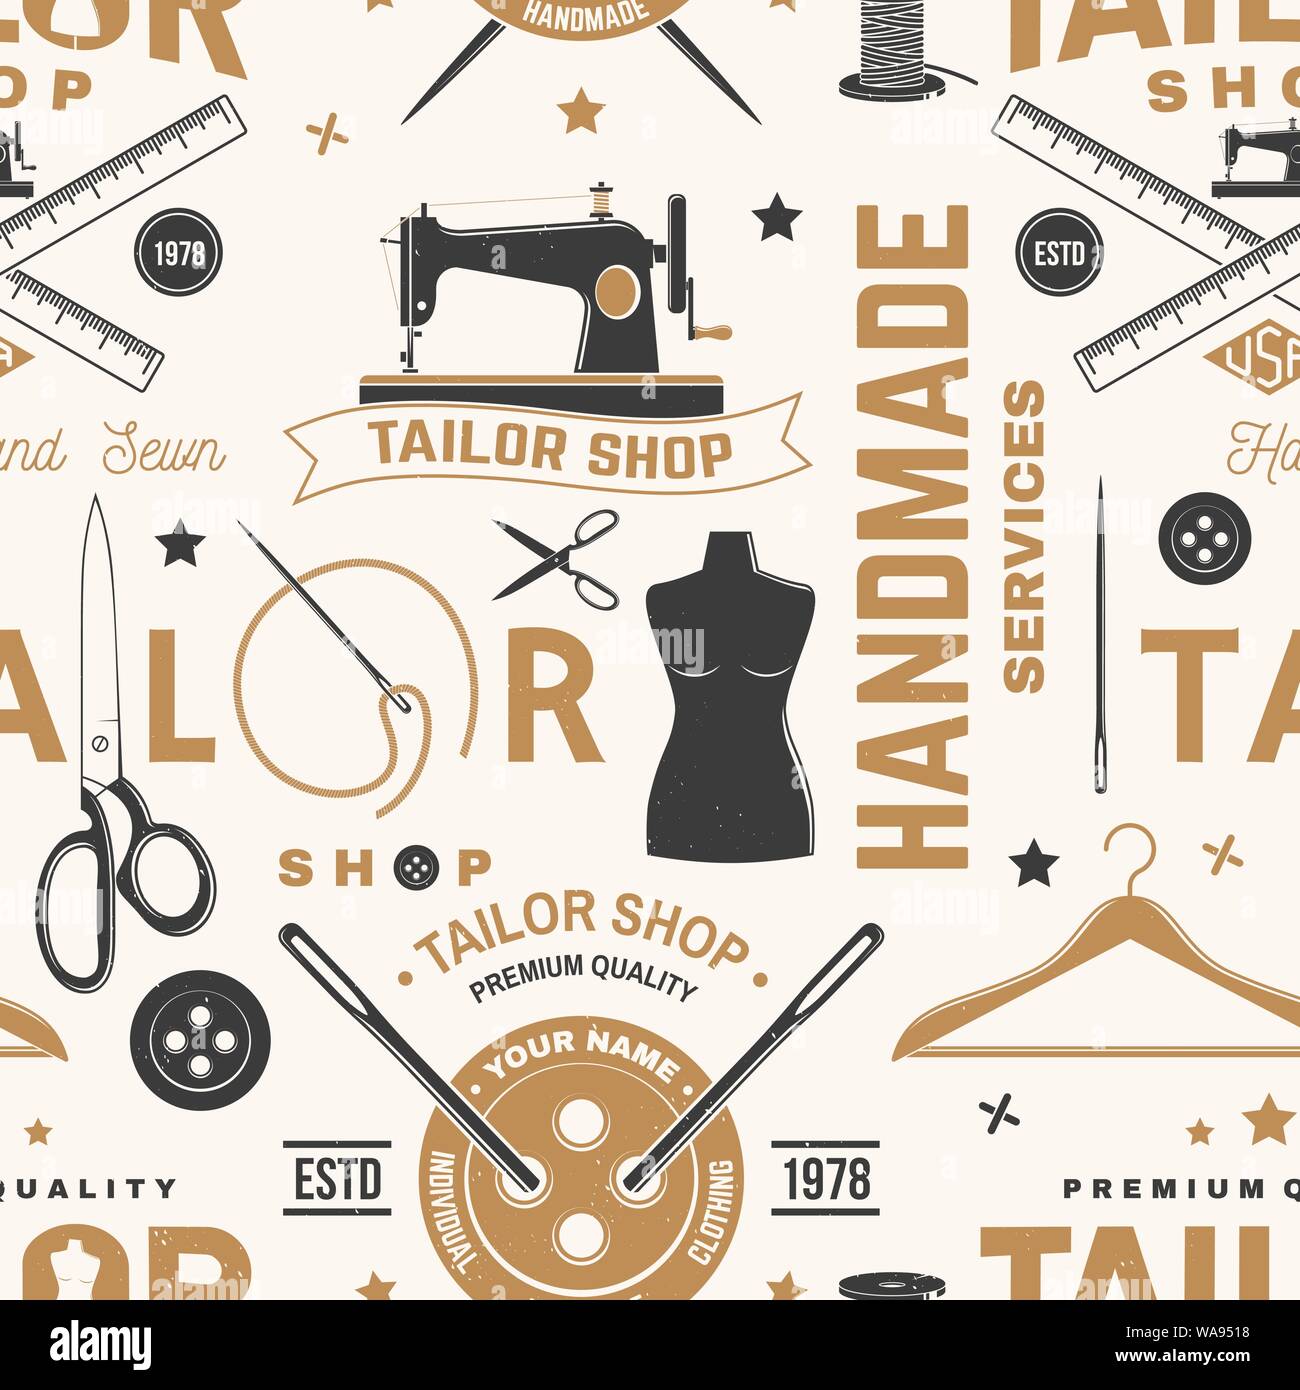 https://c8.alamy.com/comp/WA9518/tailor-shop-seamless-pattern-or-background-vector-illustration-concept-for-sewing-shop-business-design-with-sewing-accessories-silhouette-WA9518.jpg